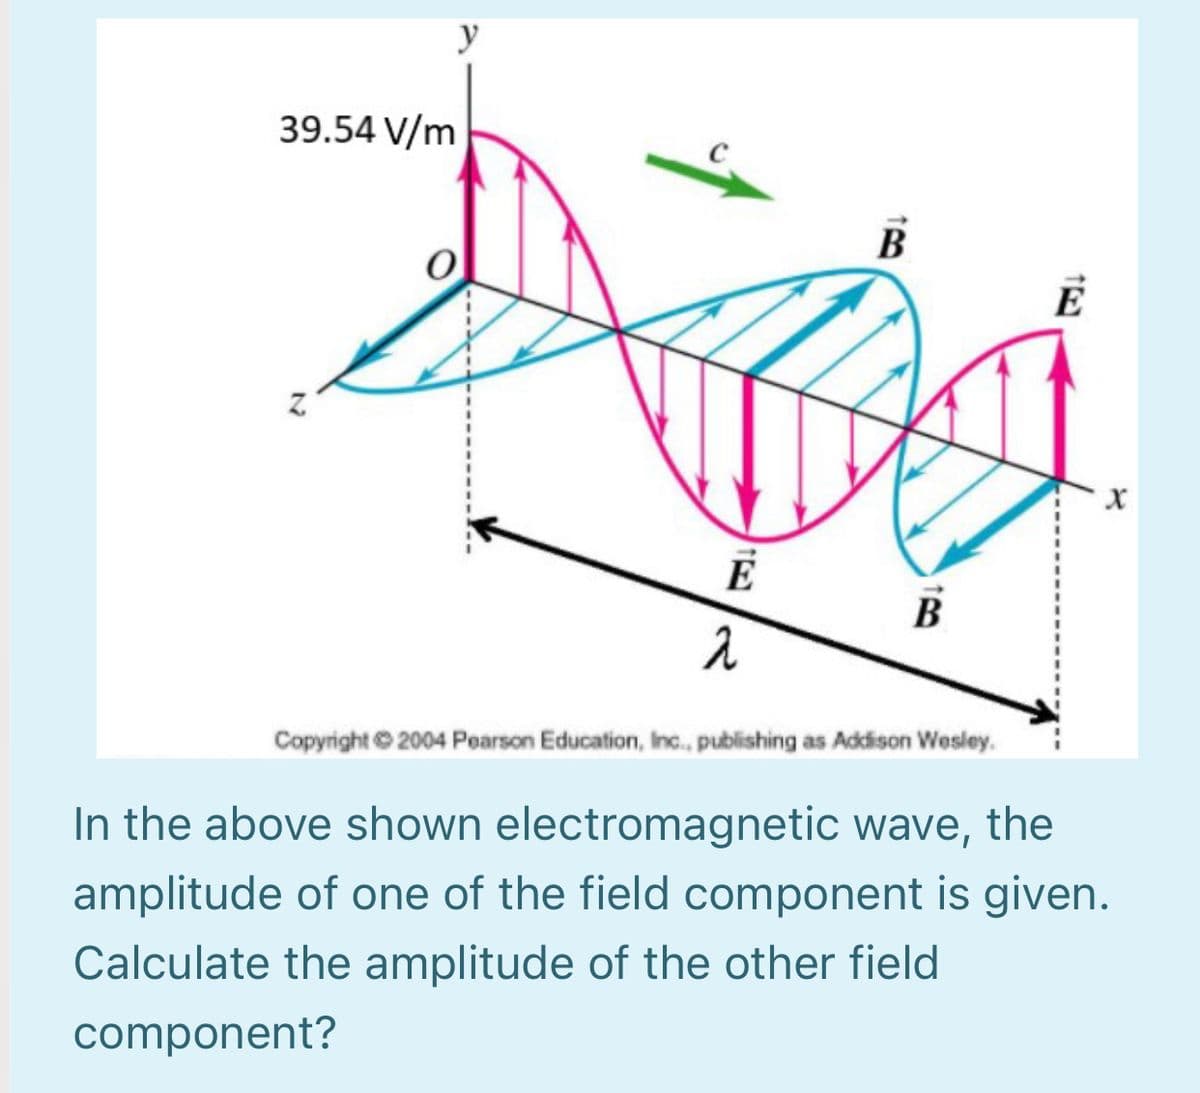 y
39.54 V/m
В
B
Copyright 2004 Poarson Education, Inc., publishing as Addison Wesley.
In the above shown electromagnetic wave, the
amplitude of one of the field component is given.
Calculate the amplitude of the other field
component?
